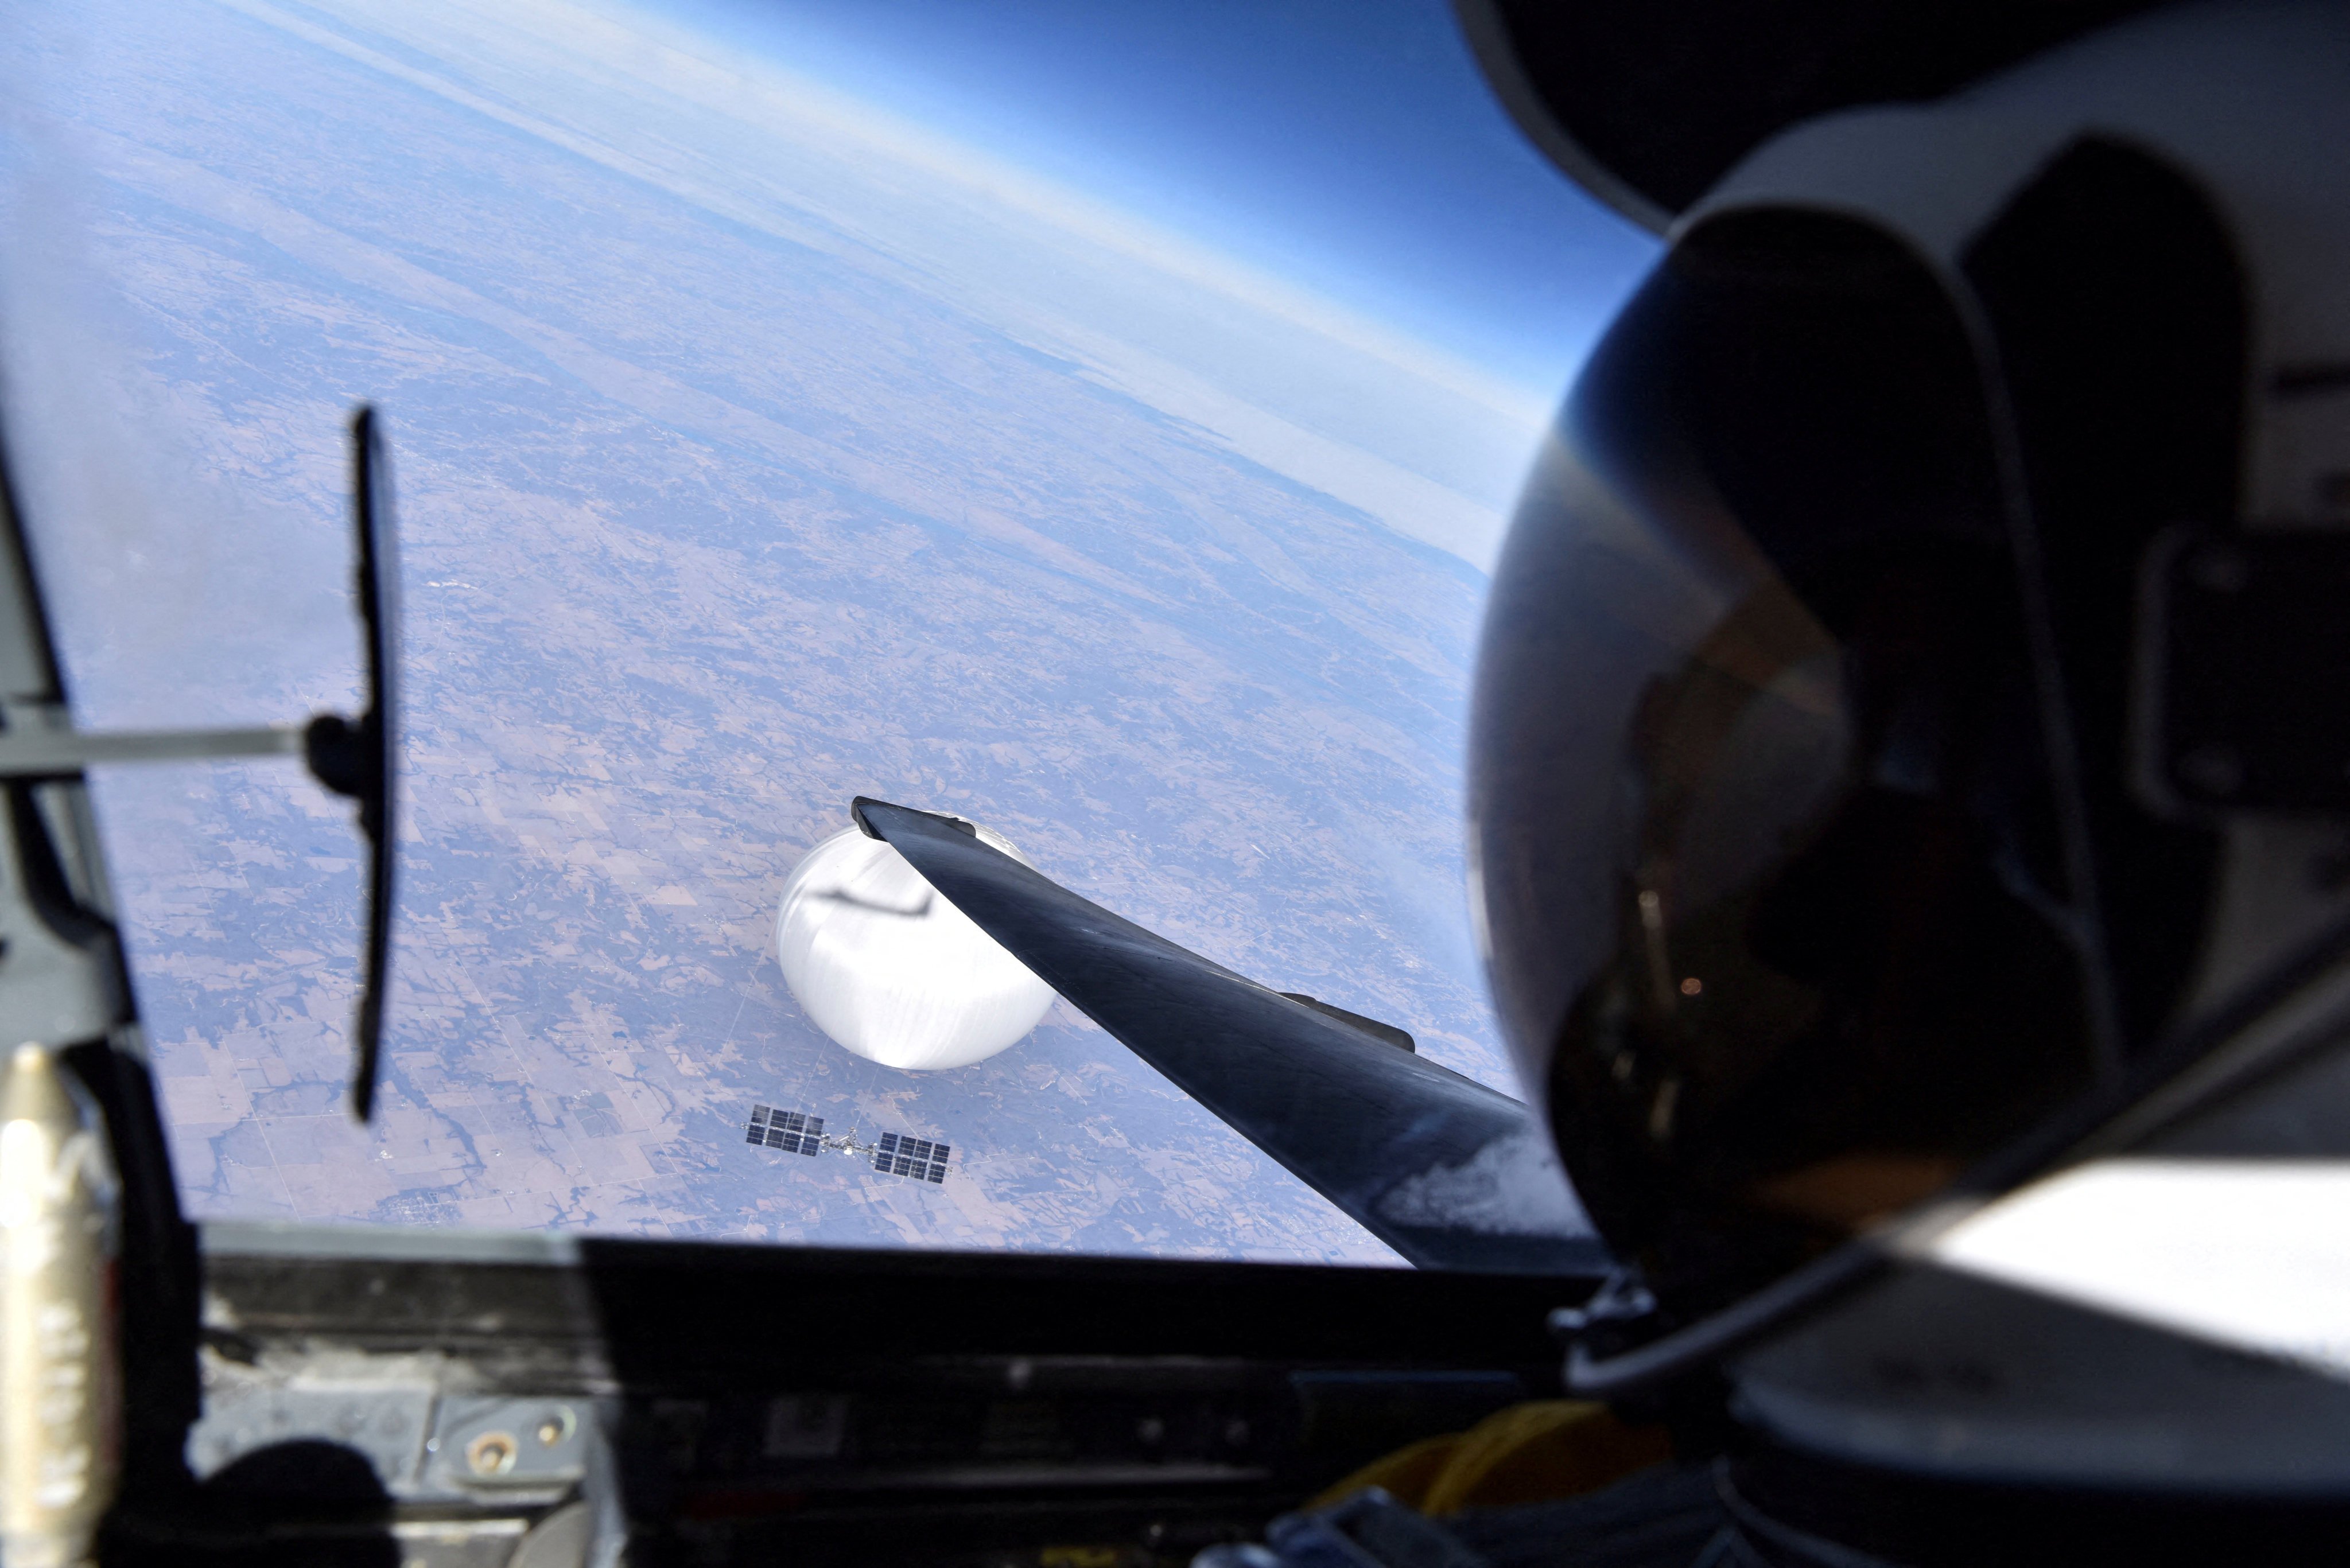 A pilot looks down at the suspected Chinese spy balloon as it hovers over the central continental US before being shot down by the air force off the coast of South Carolina. File photo: US air force/Department of Defence/Reuters